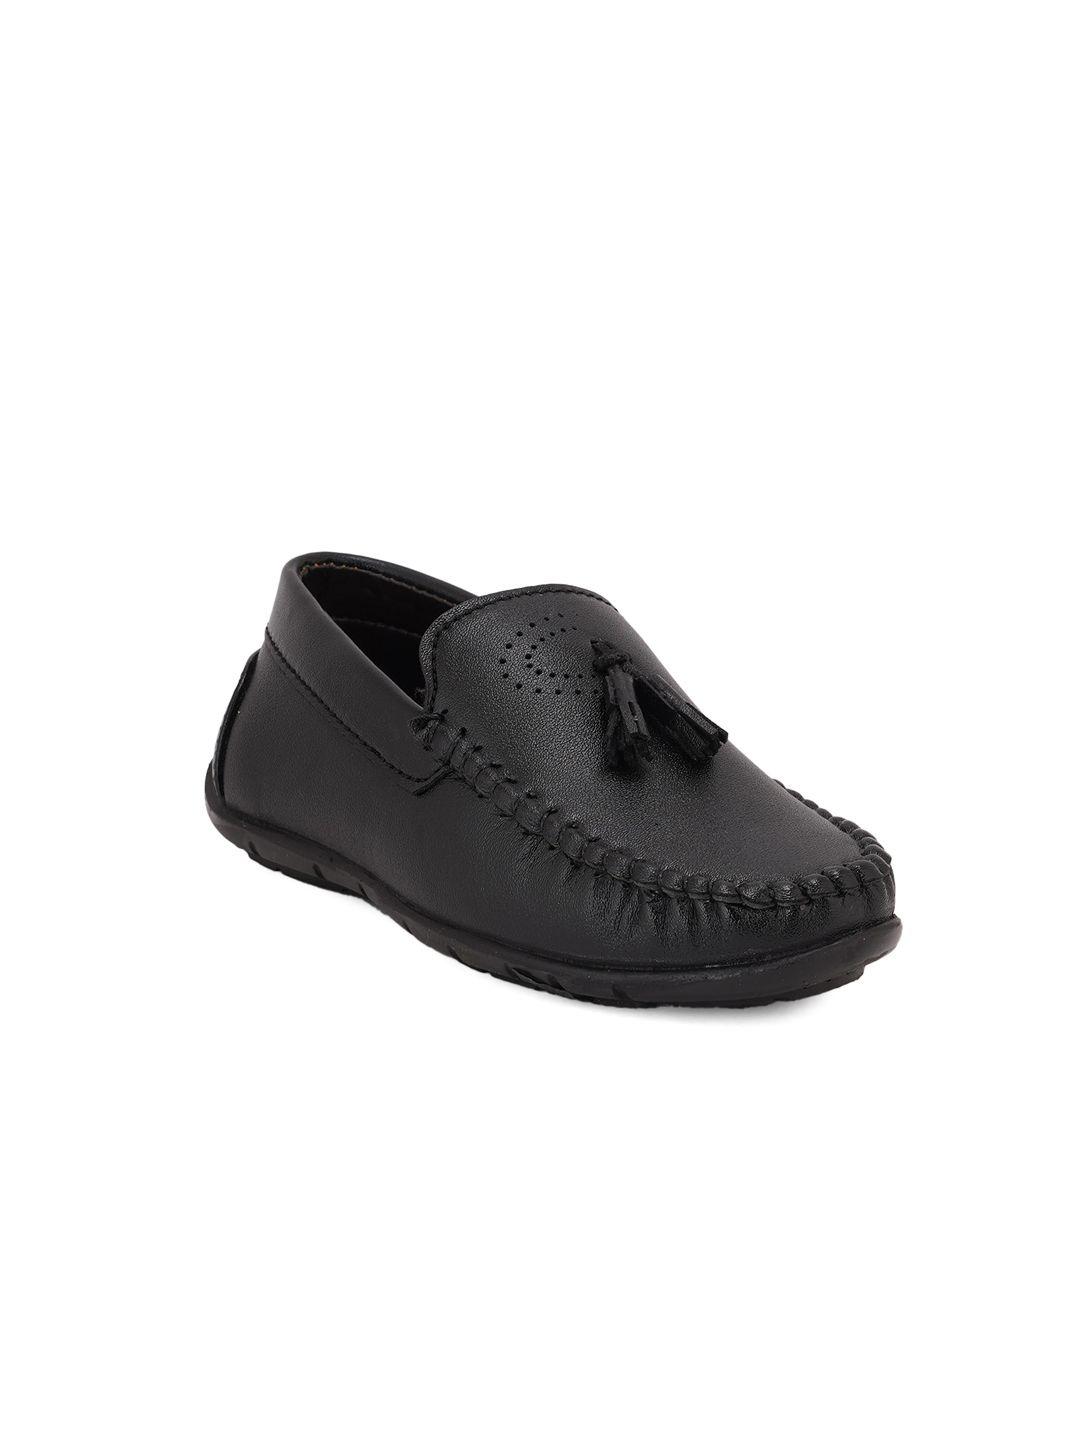 style shoes boys textured formal loafers